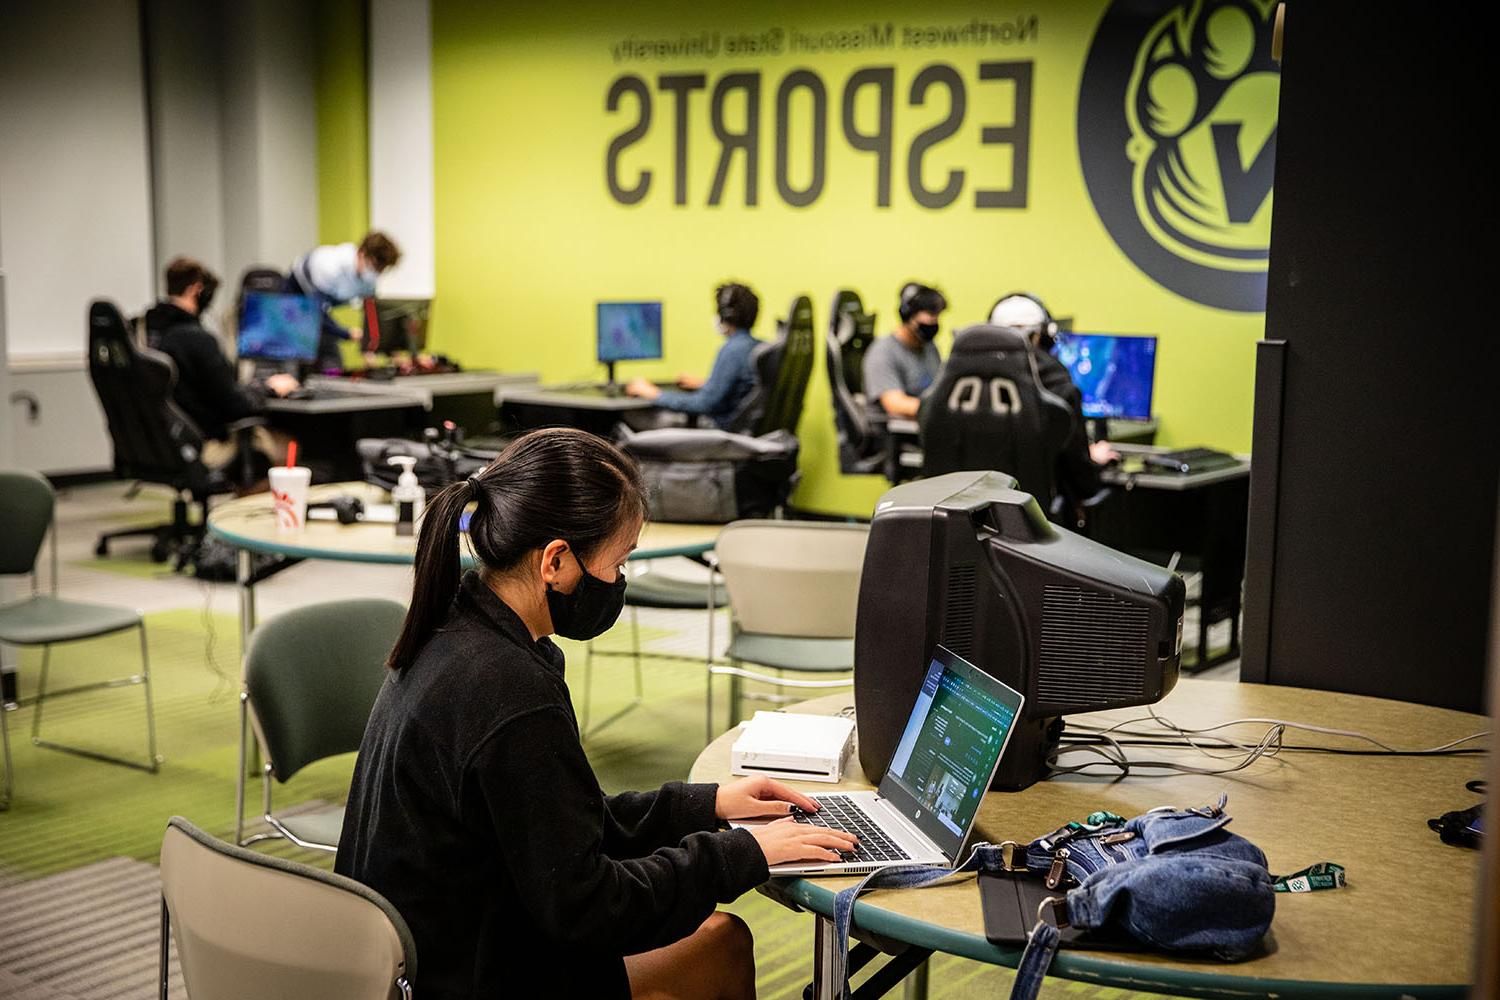 Northwest's esports room is outfitted with a variety of gaming centers and furnishings to support student engagement as well as the competitive video gaming environment.